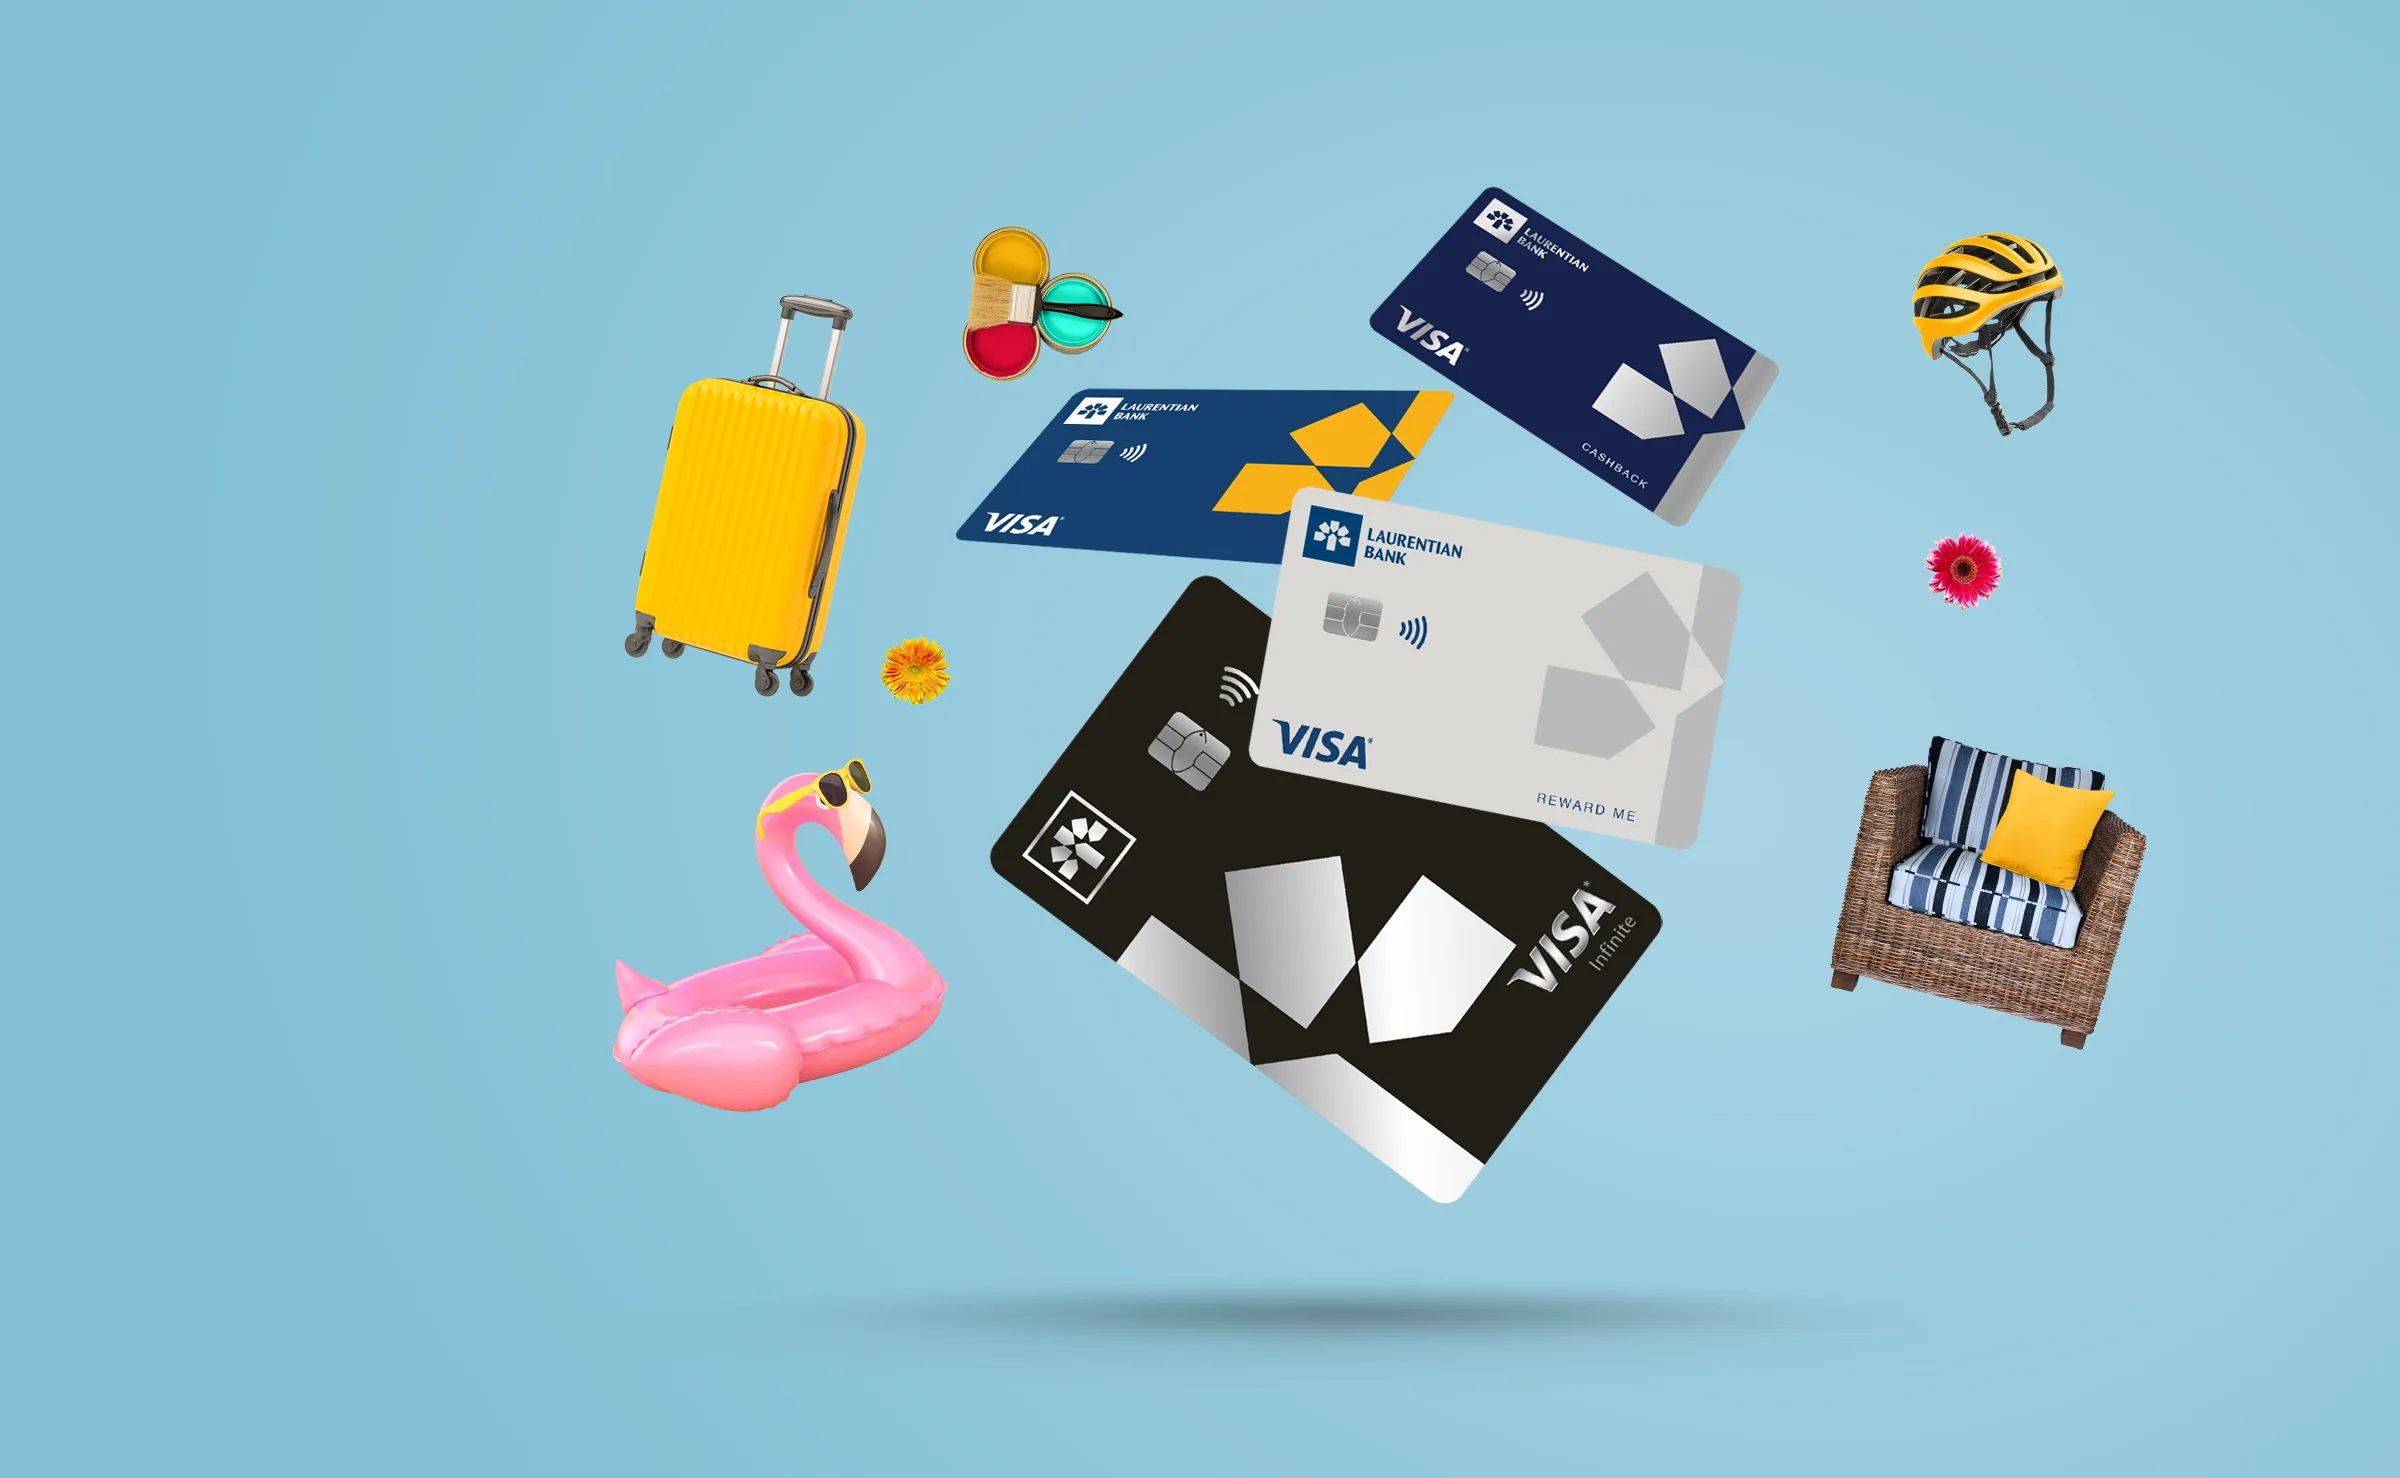 Four Laurentian Bank credit cards float in mid-air with items swirling around them: A suitcase, inflatable flamingo pool floaty, cans of paint with a brush, bicycle helmet and a deck chair.